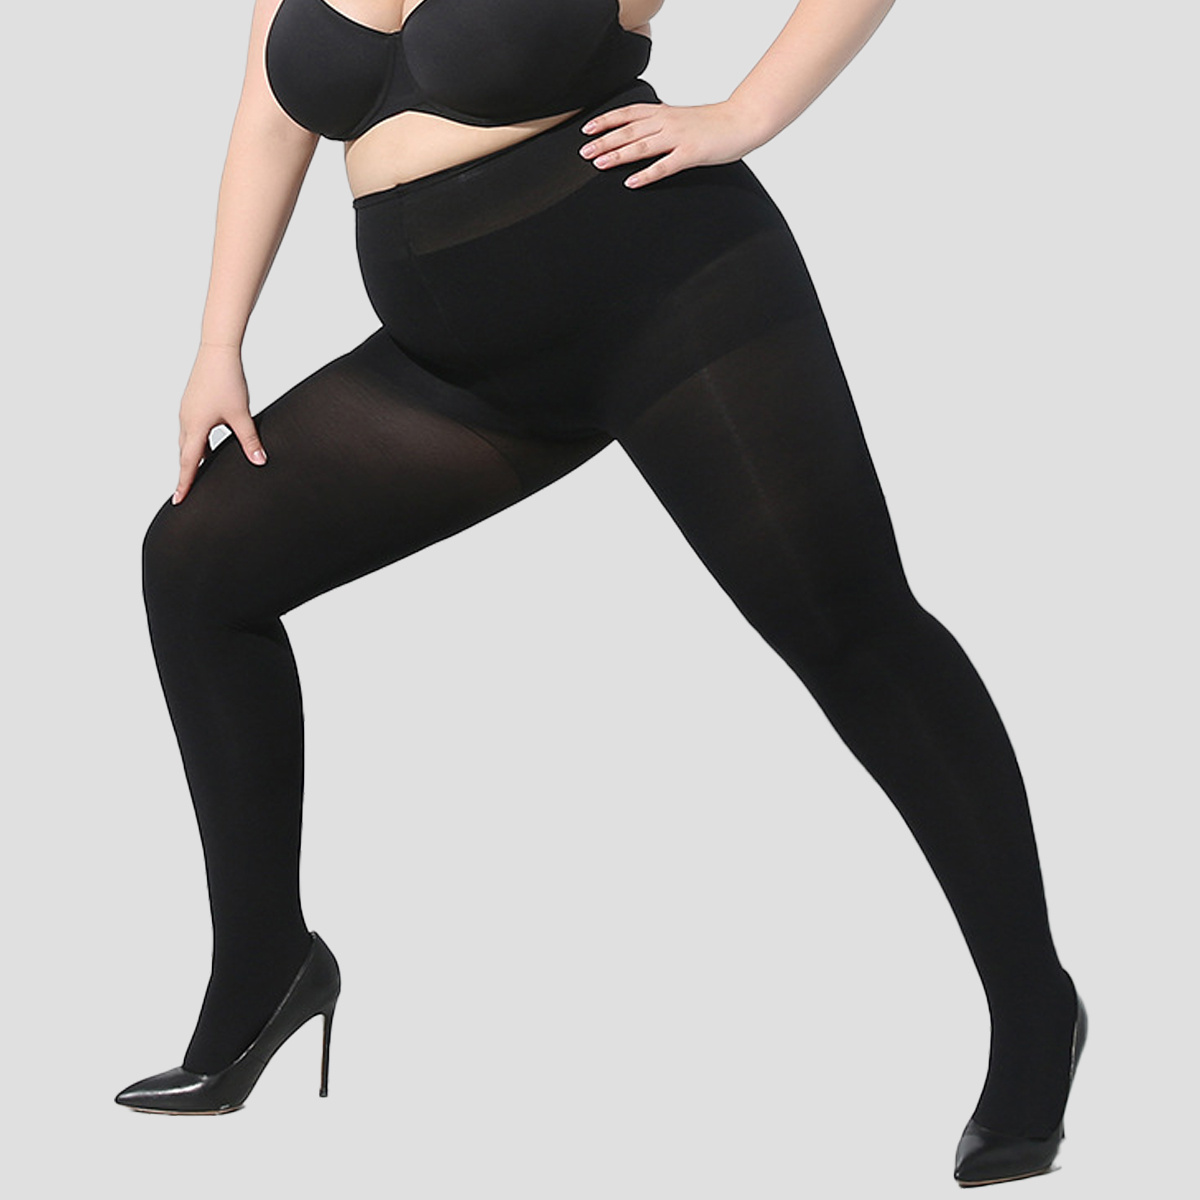 Spanx Nylon Sheer Pantyhose and Tights for Women for sale